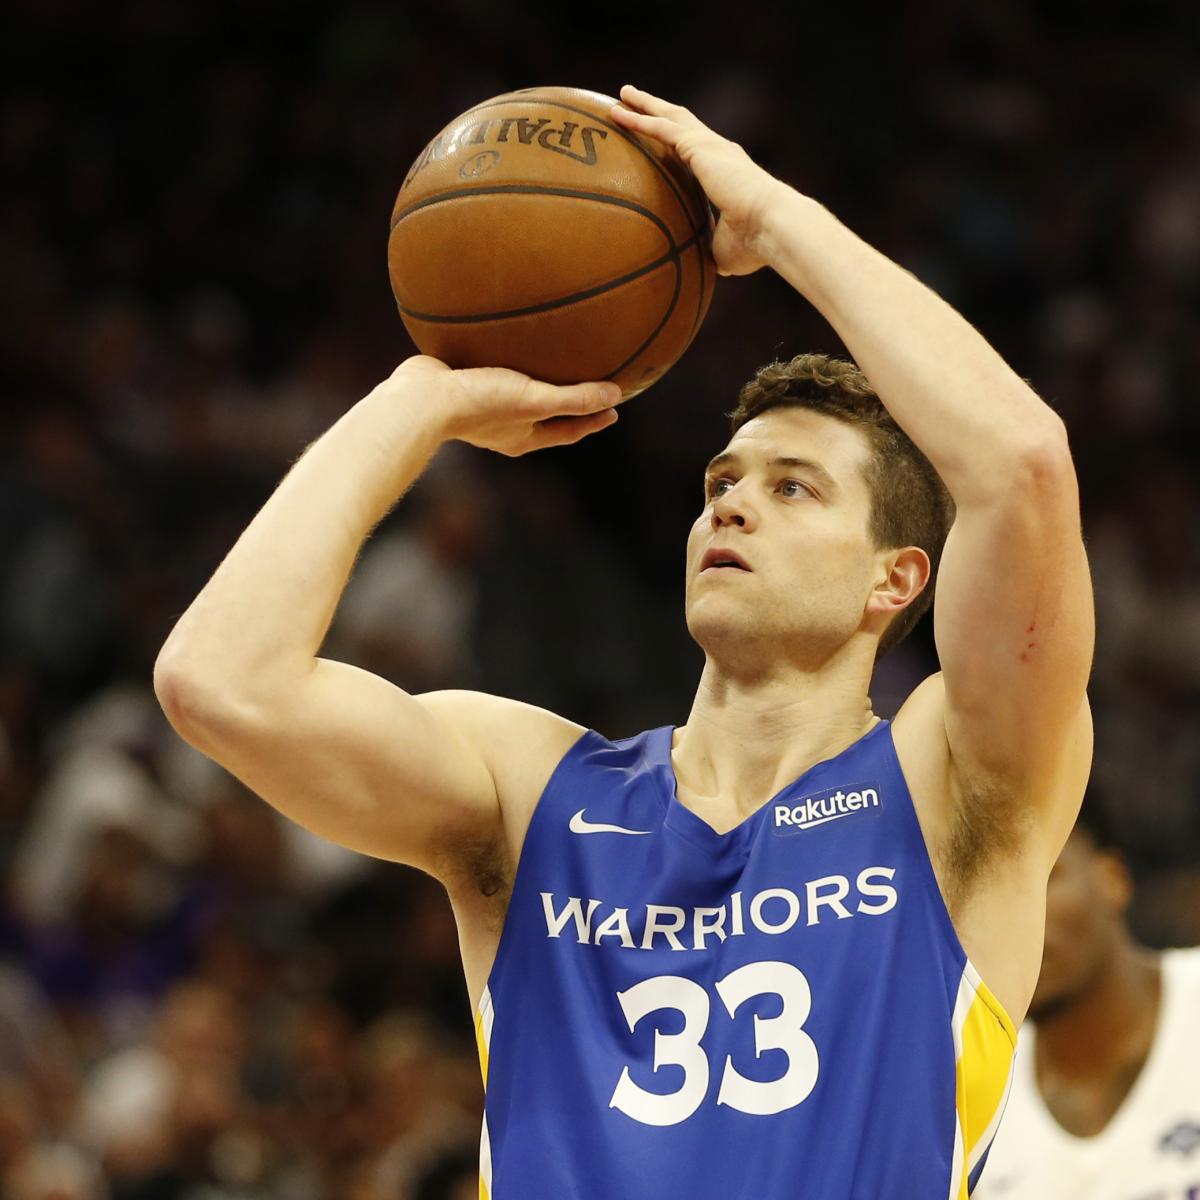 Jimmer Fredette's NBA career started and ended in Sacramento